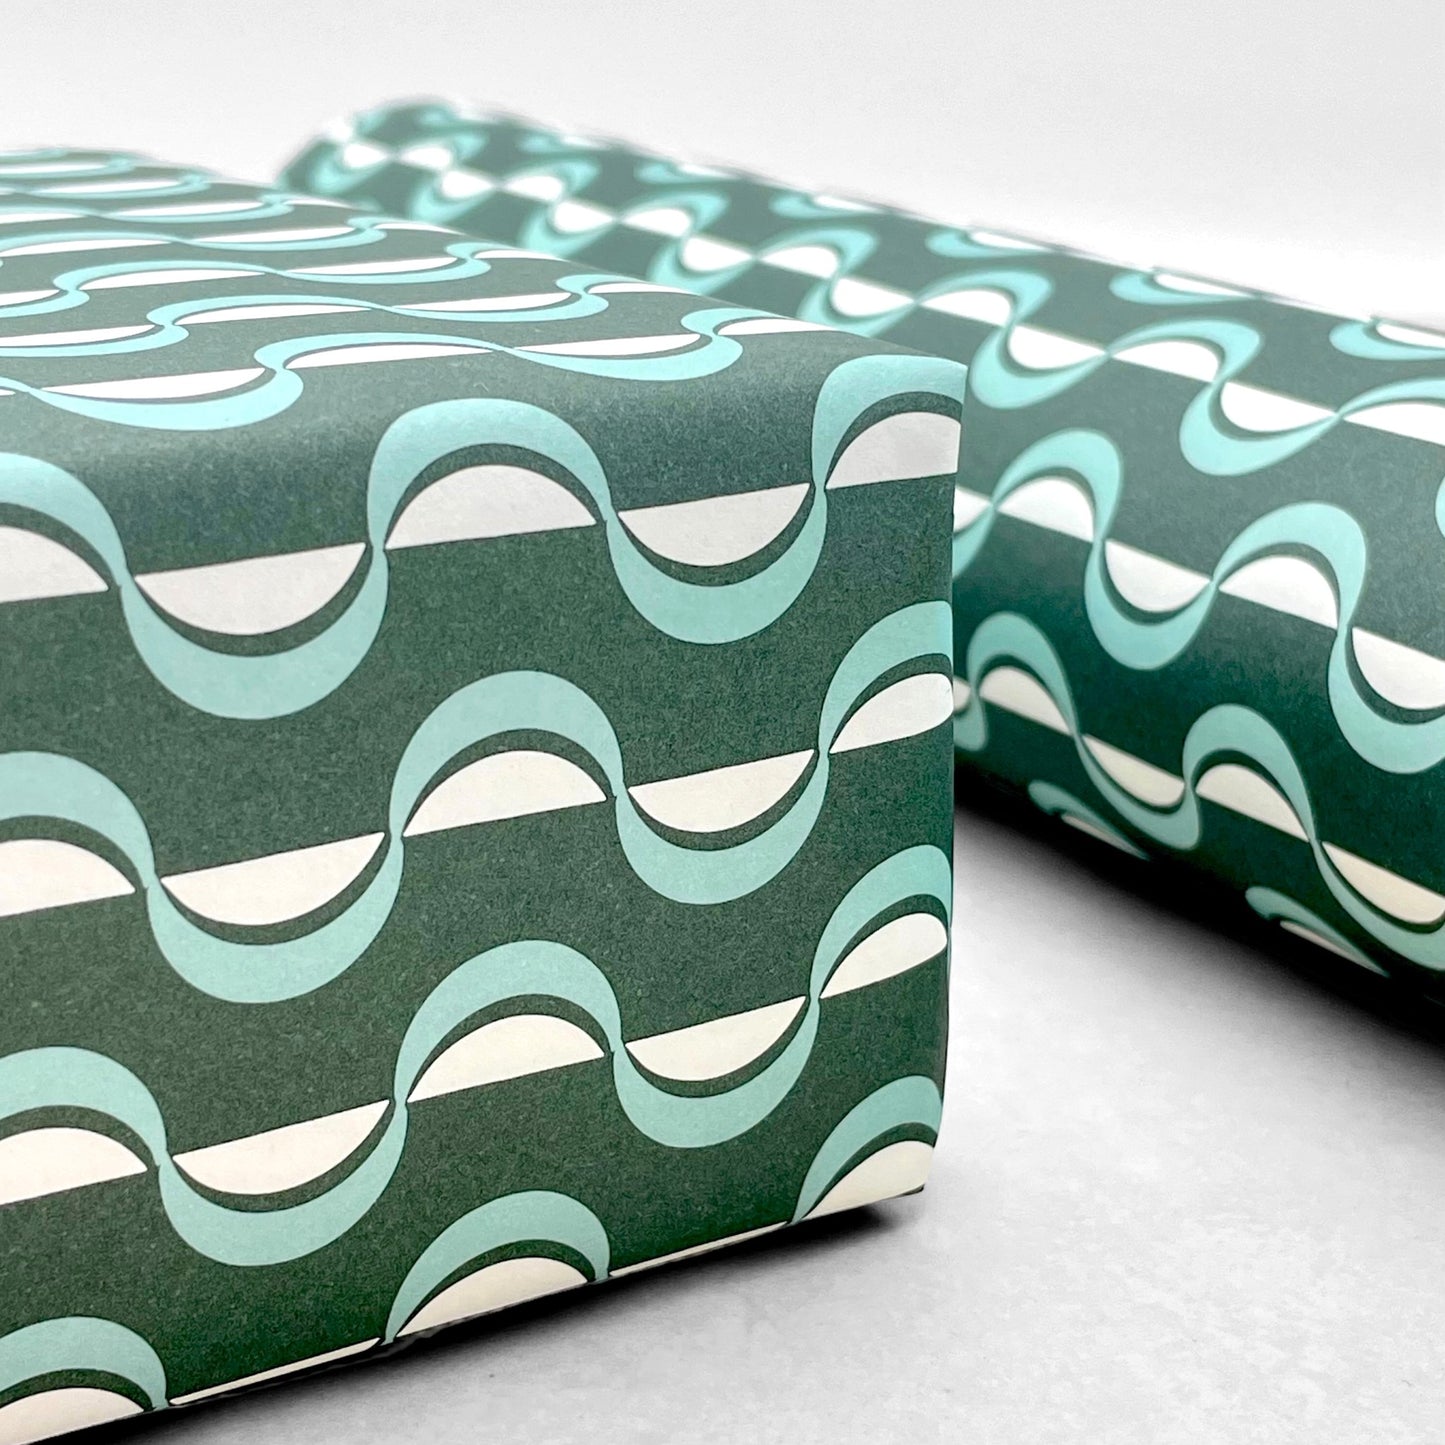 wavy striped geometric wrapping paper in forest green, aqua and white, by Ola Studio forest, close up